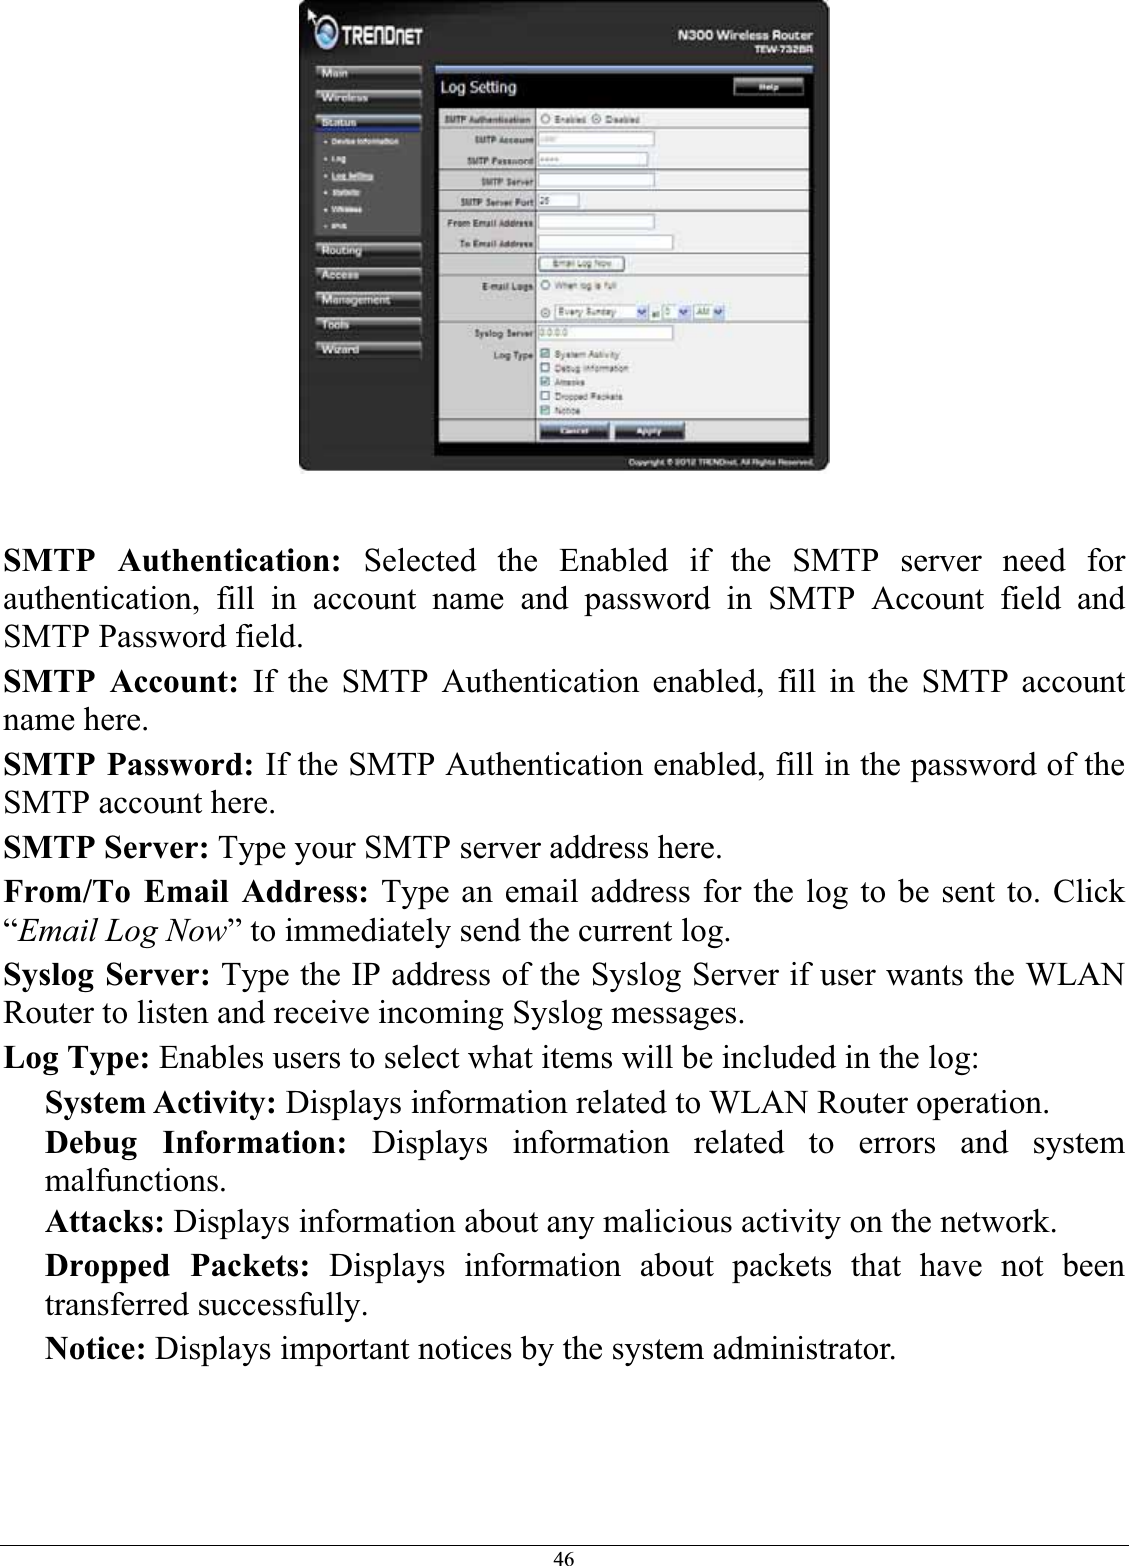 46SMTP Authentication: Selected the Enabled if the SMTP server need for authentication, fill in account name and password in SMTP Account field and SMTP Password field. SMTP Account: If the SMTP Authentication enabled, fill in the SMTP account name here.SMTP Password: If the SMTP Authentication enabled, fill in the password of the SMTP account here. SMTP Server: Type your SMTP server address here. From/To Email Address: Type an email address for the log to be sent to. Click “Email Log Now” to immediately send the current log. Syslog Server: Type the IP address of the Syslog Server if user wants the WLAN Router to listen and receive incoming Syslog messages. Log Type: Enables users to select what items will be included in the log: System Activity: Displays information related to WLAN Router operation. Debug Information: Displays information related to errors and system malfunctions.Attacks: Displays information about any malicious activity on the network. Dropped Packets: Displays information about packets that have not been transferred successfully. Notice: Displays important notices by the system administrator. 